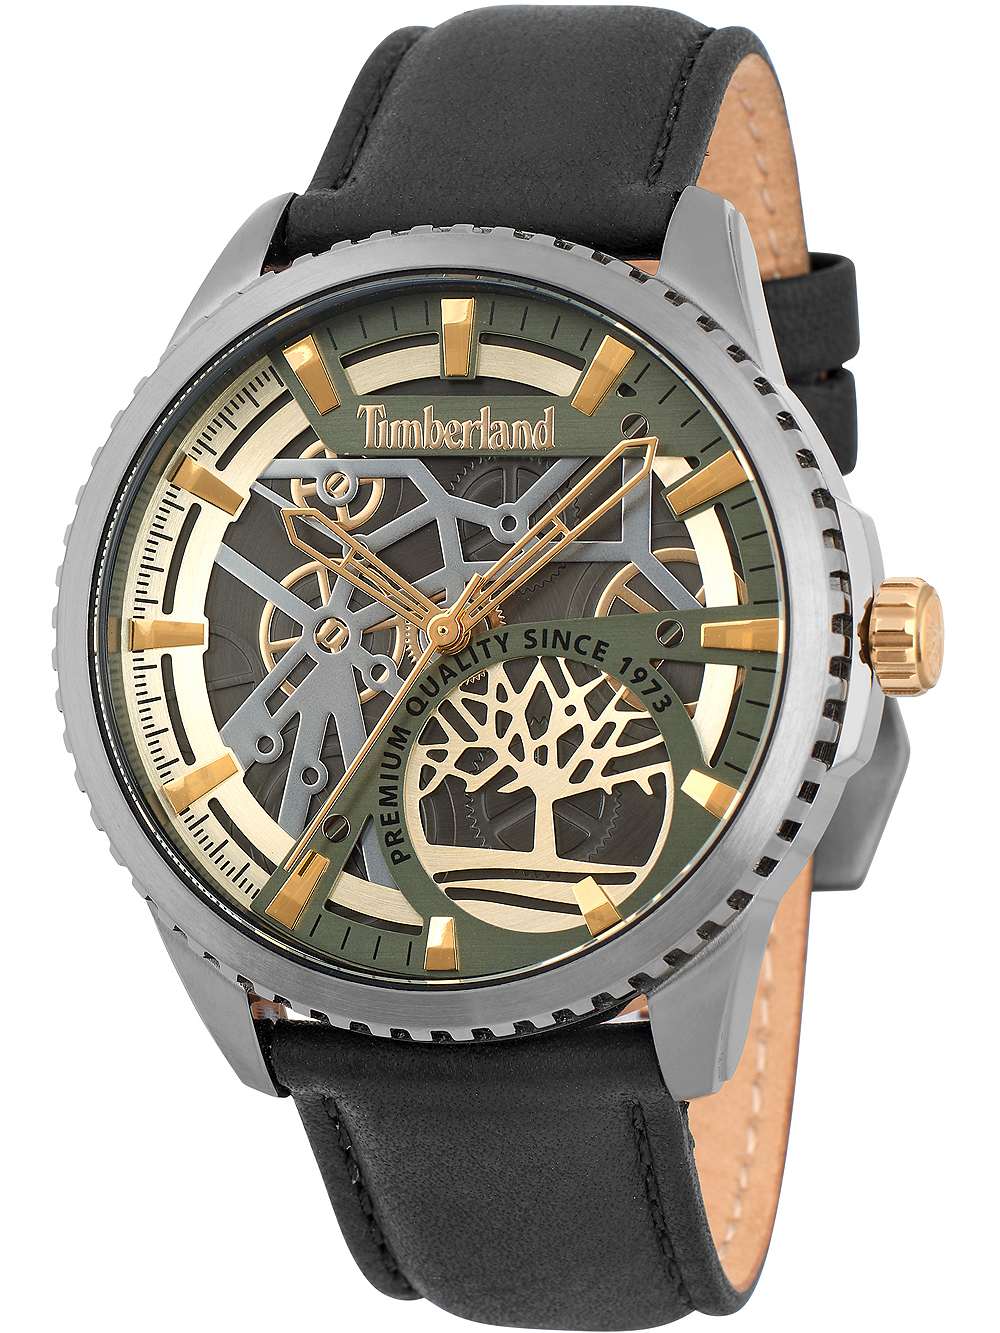 Timberland TDWJA2000903 Colchester 44mm 5ATM